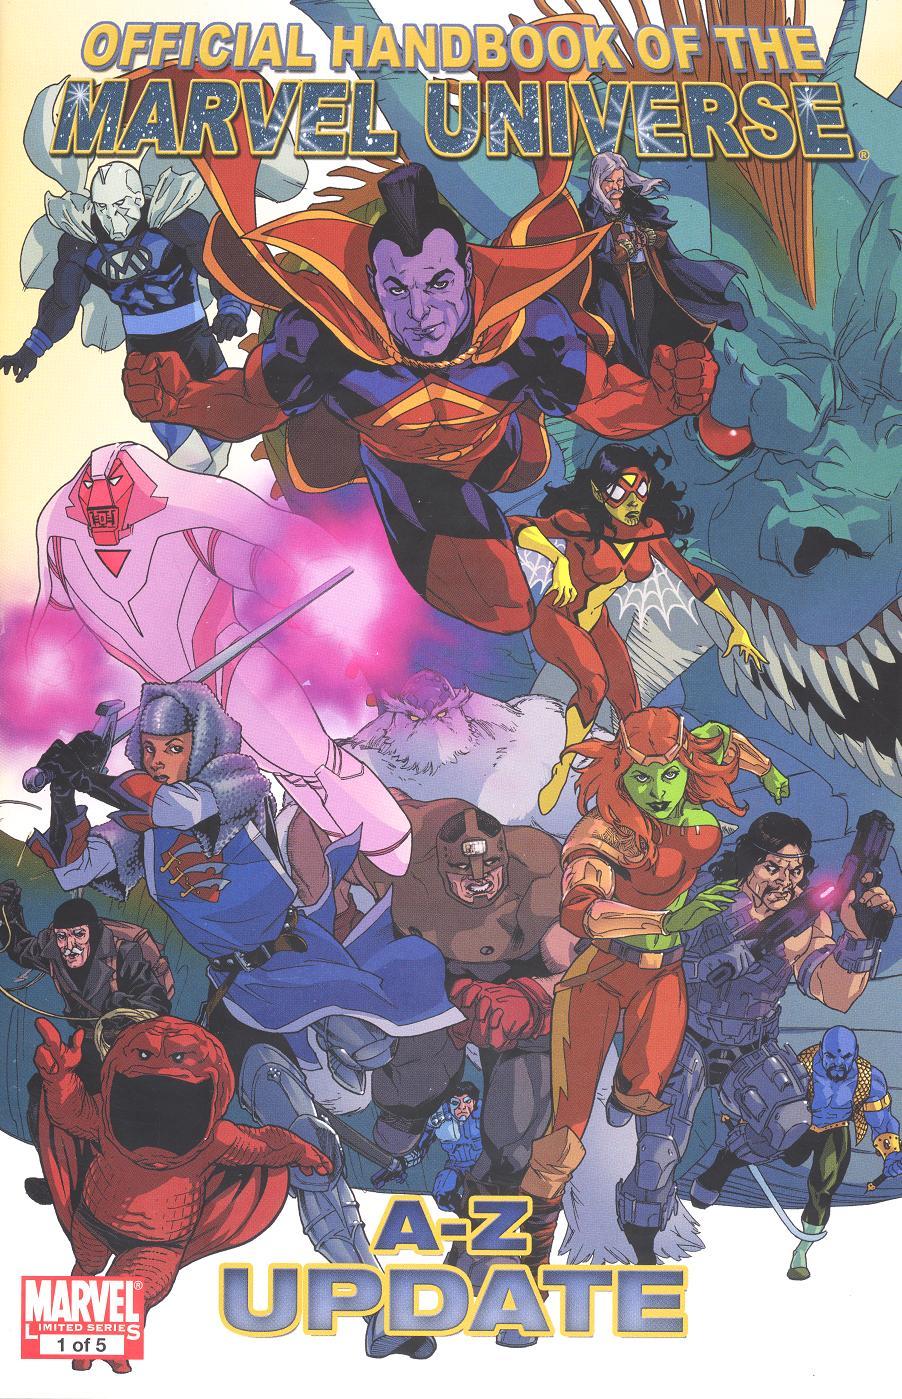 Official Handbook of the Marvel Universe A-Z Update Vol. 1 #1